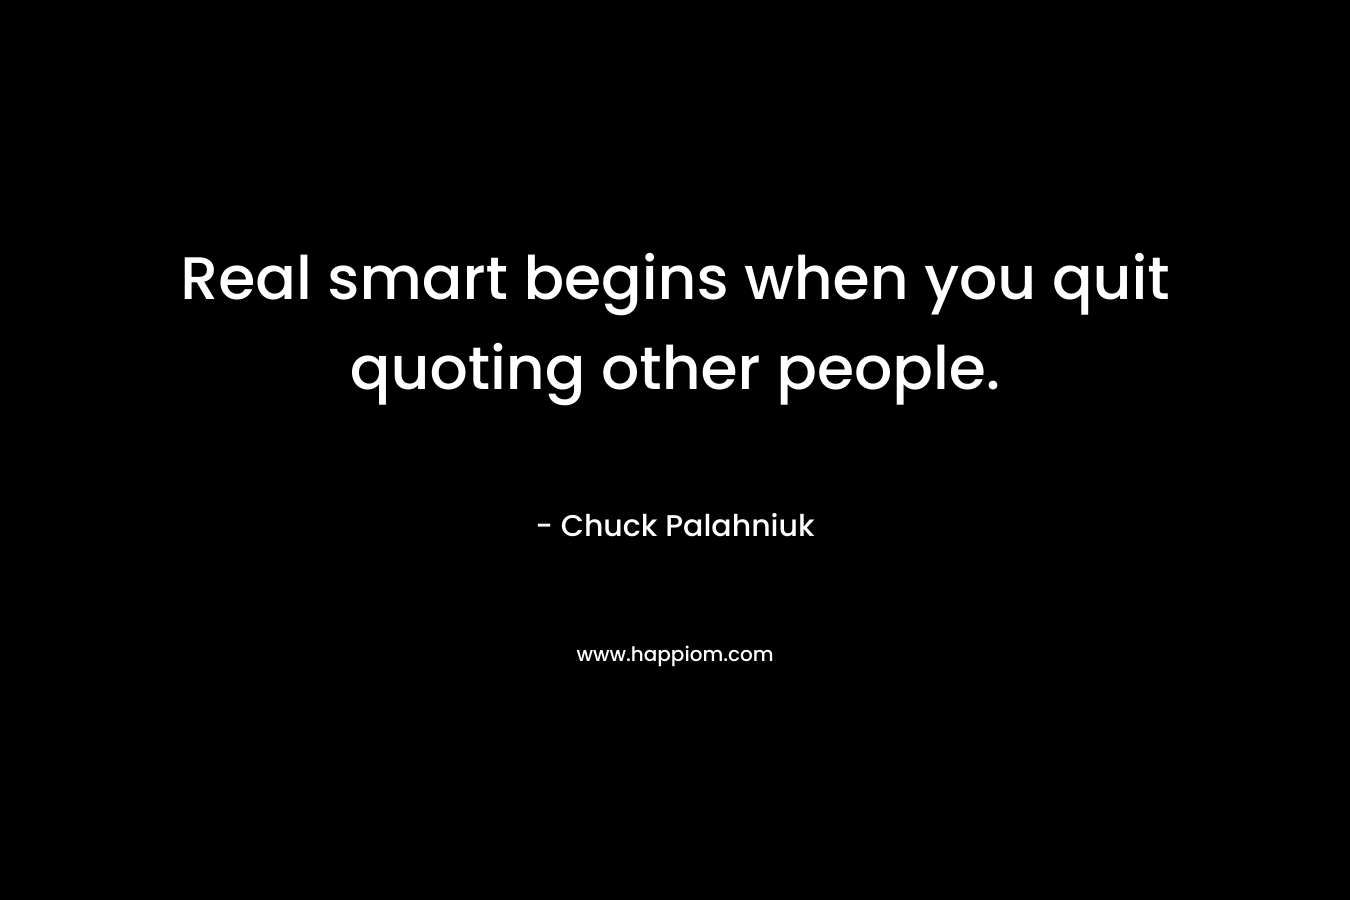 Real smart begins when you quit quoting other people.